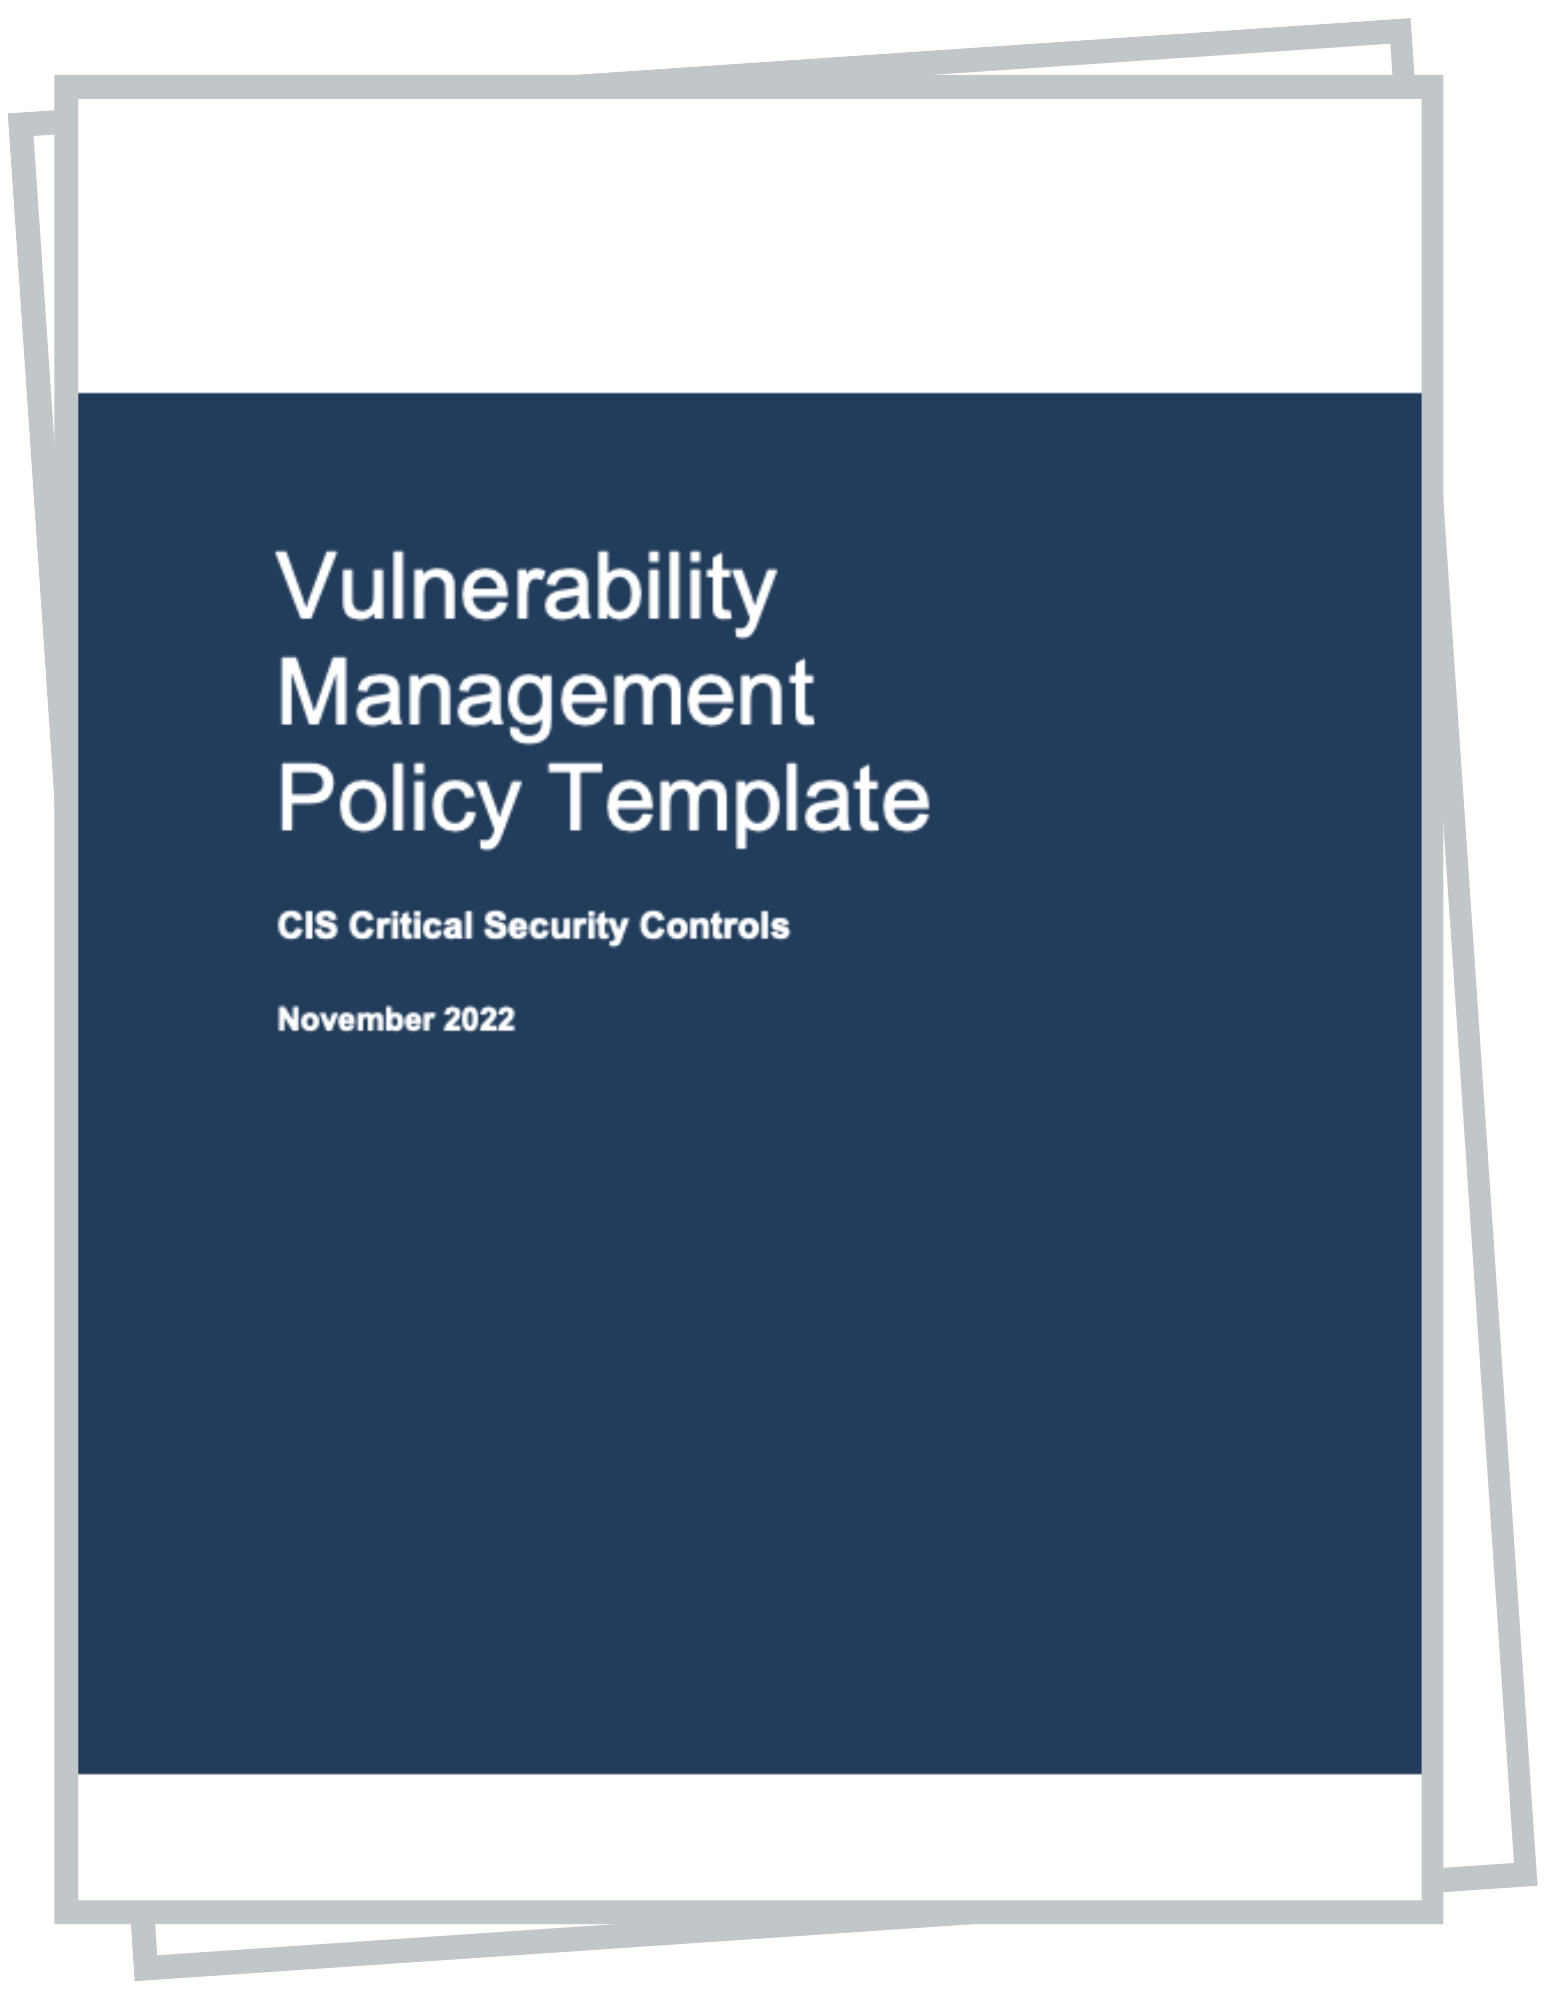 Vulnerability Management Policy Template for CIS Control 7 image